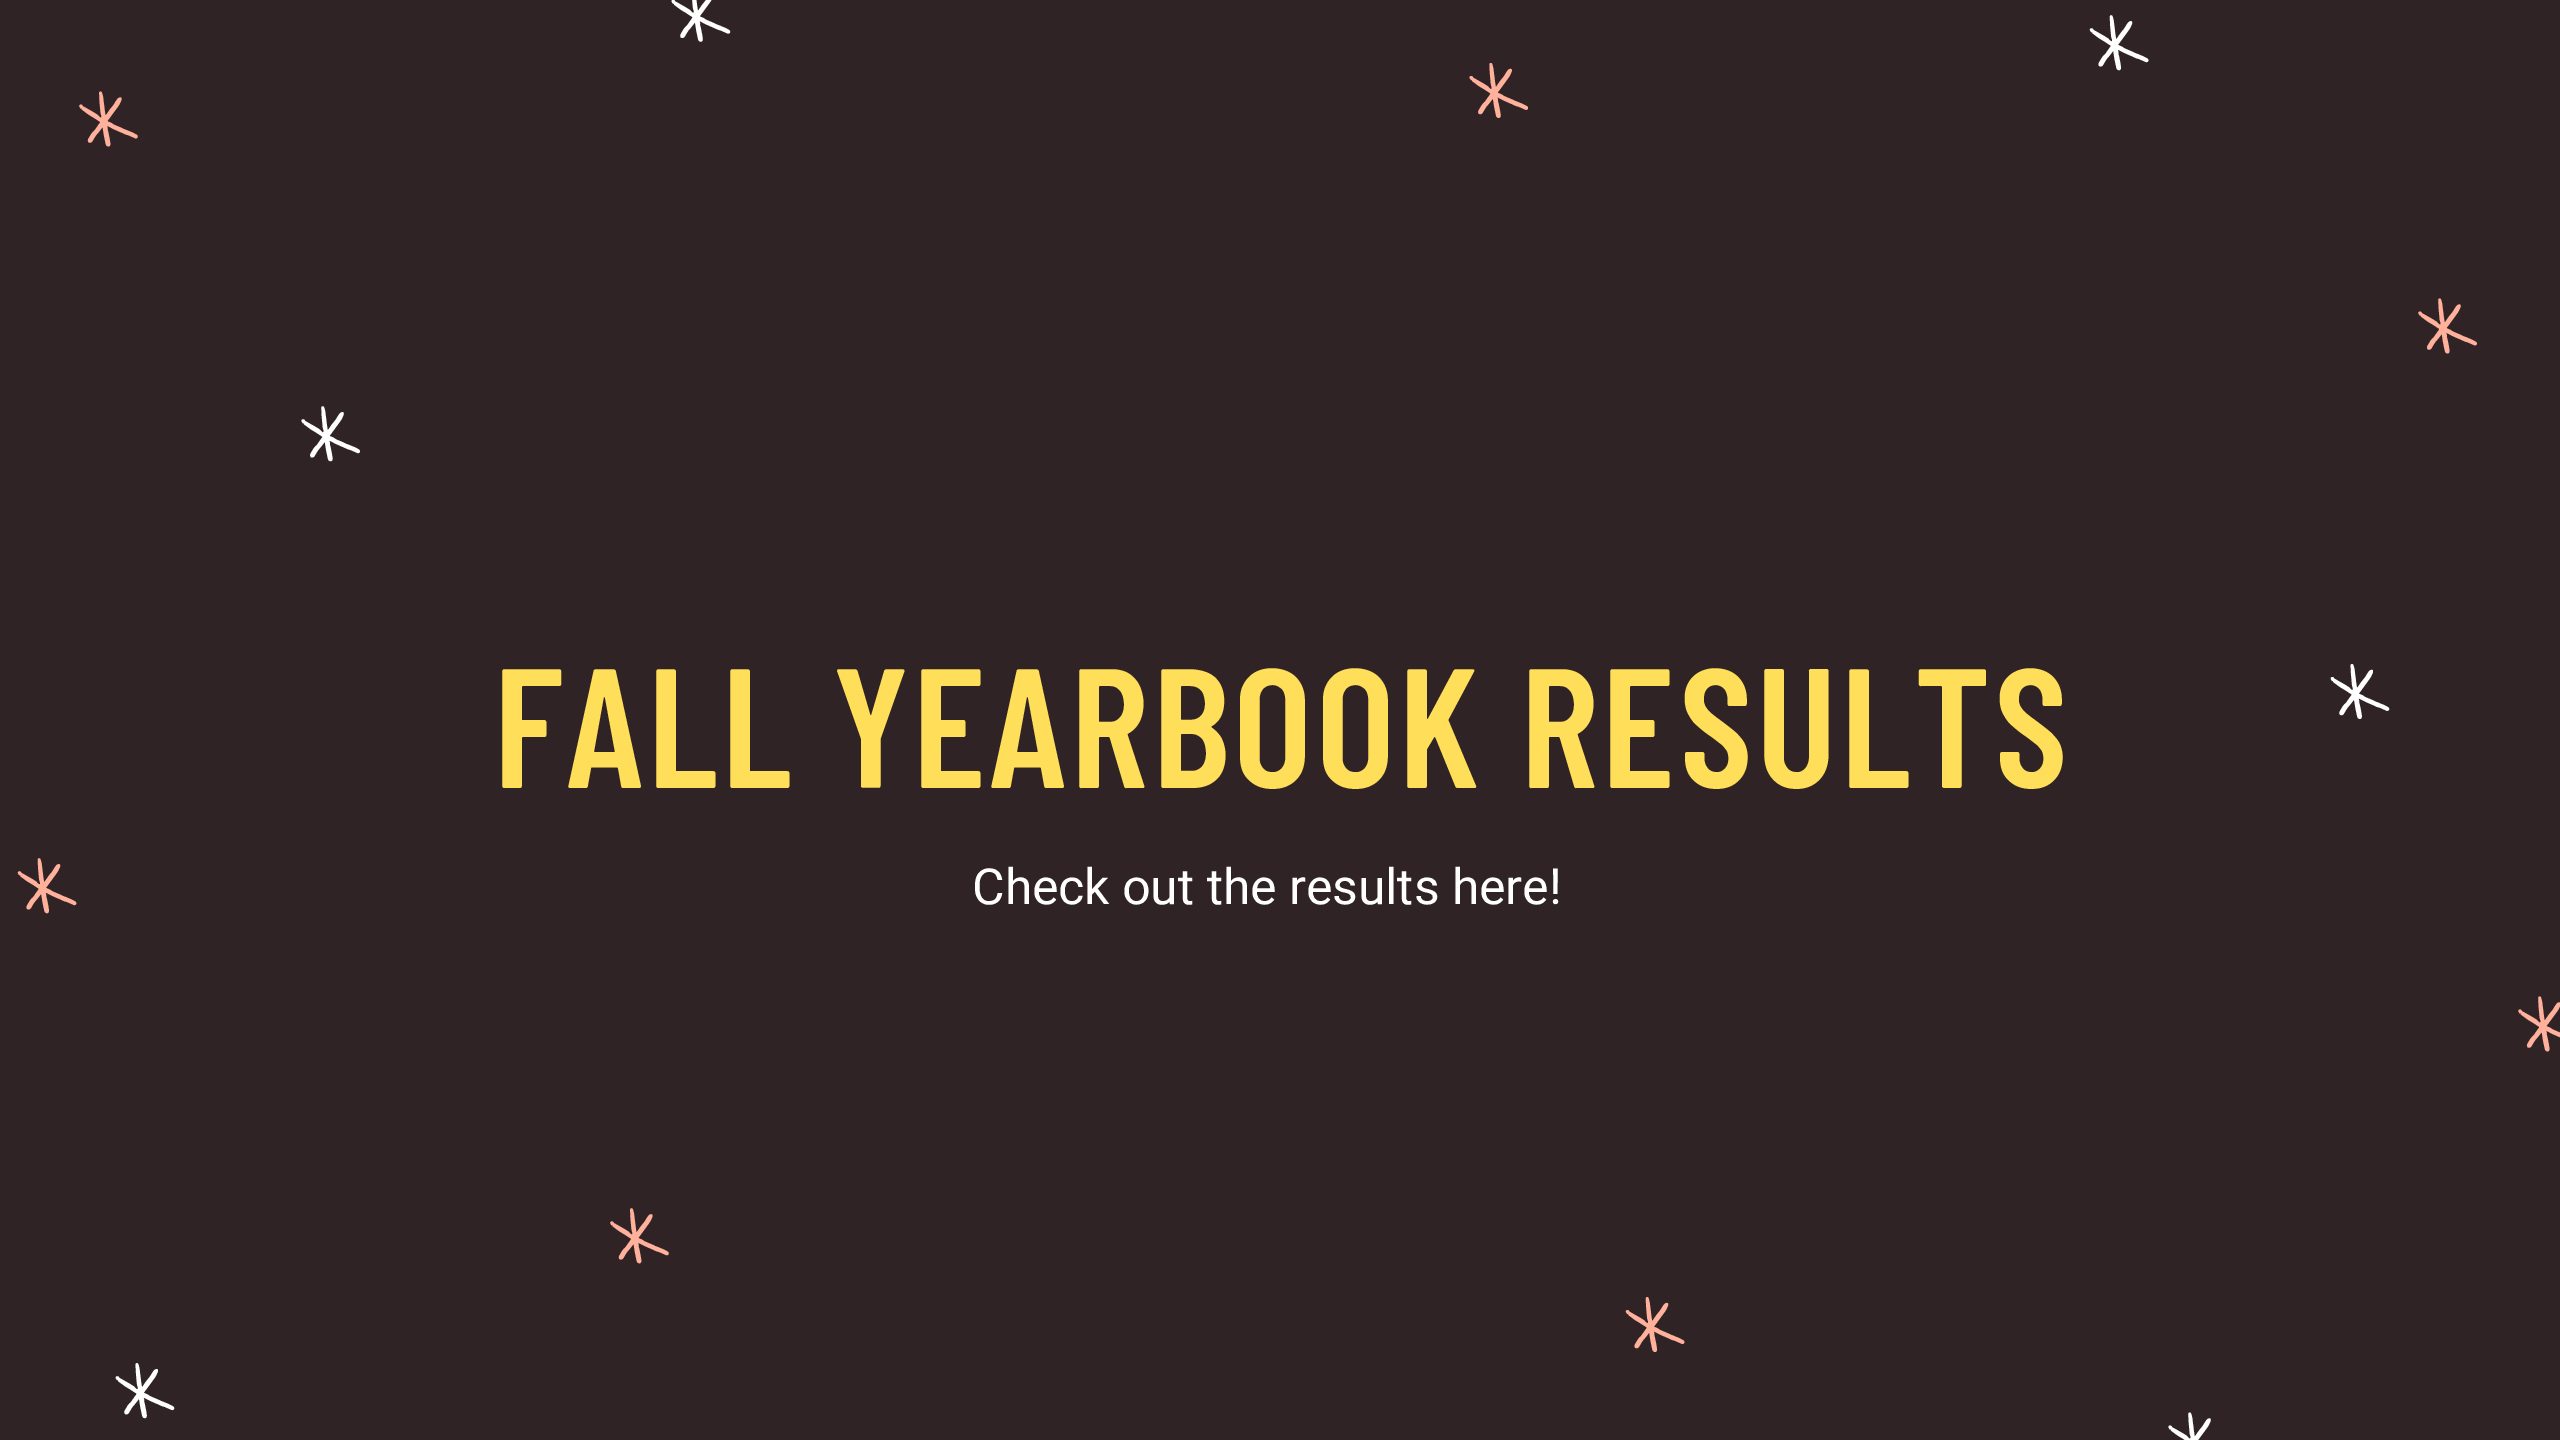 Fall yearbook results in detail